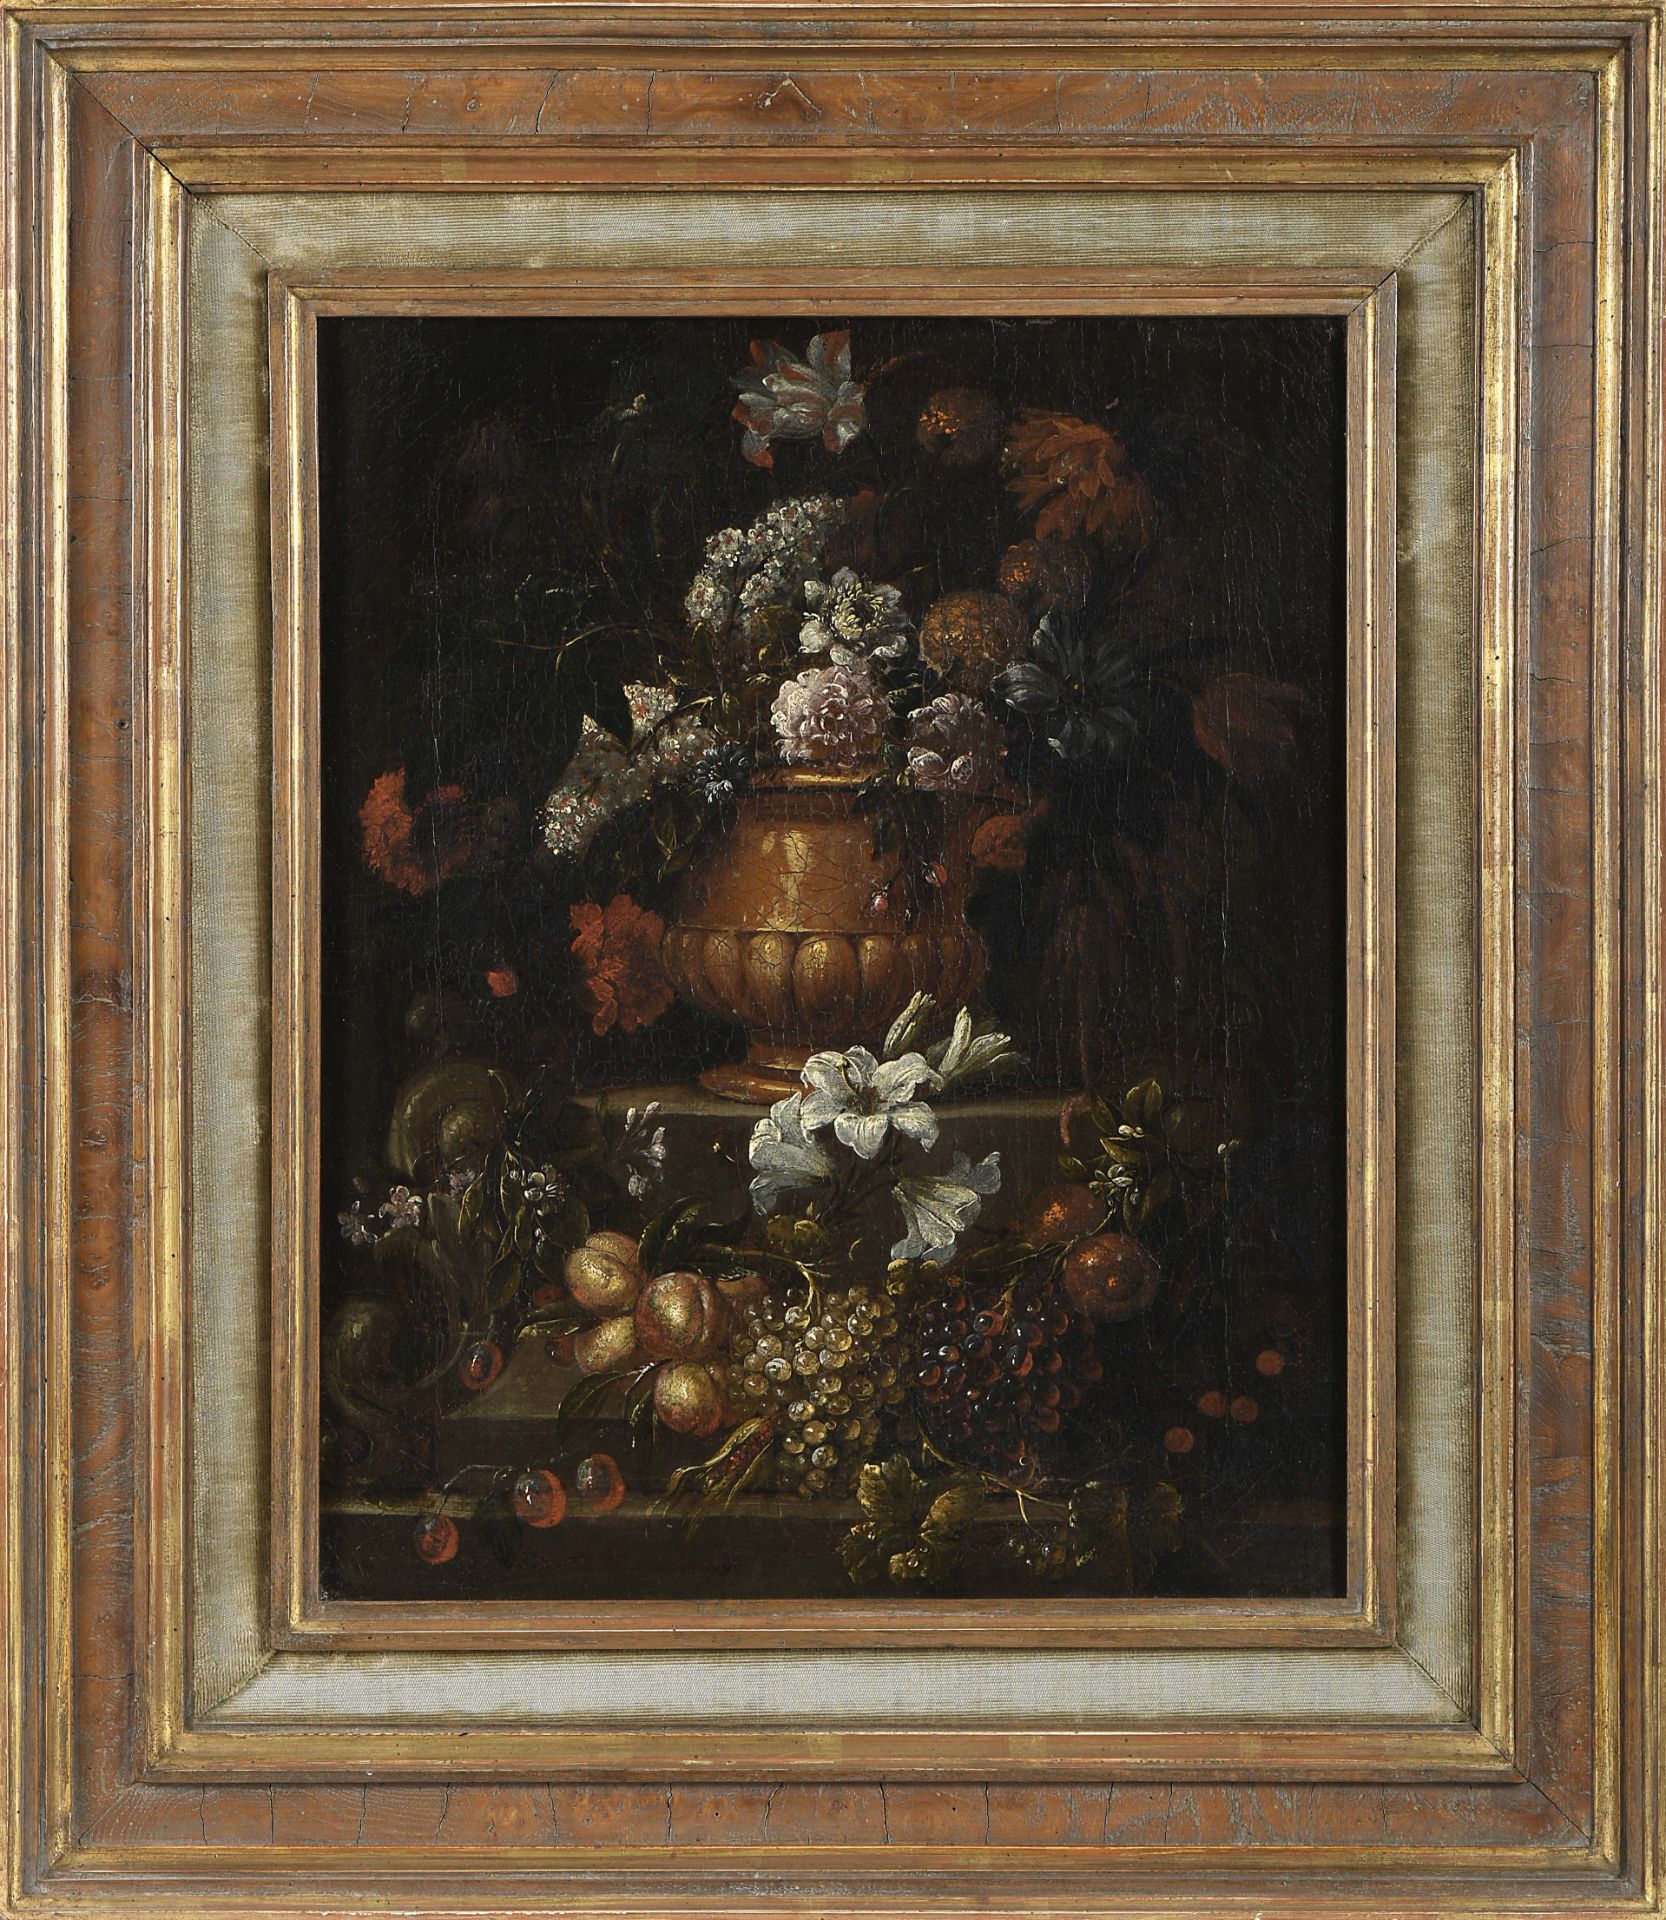 Still life - Vase with flowers and fruits